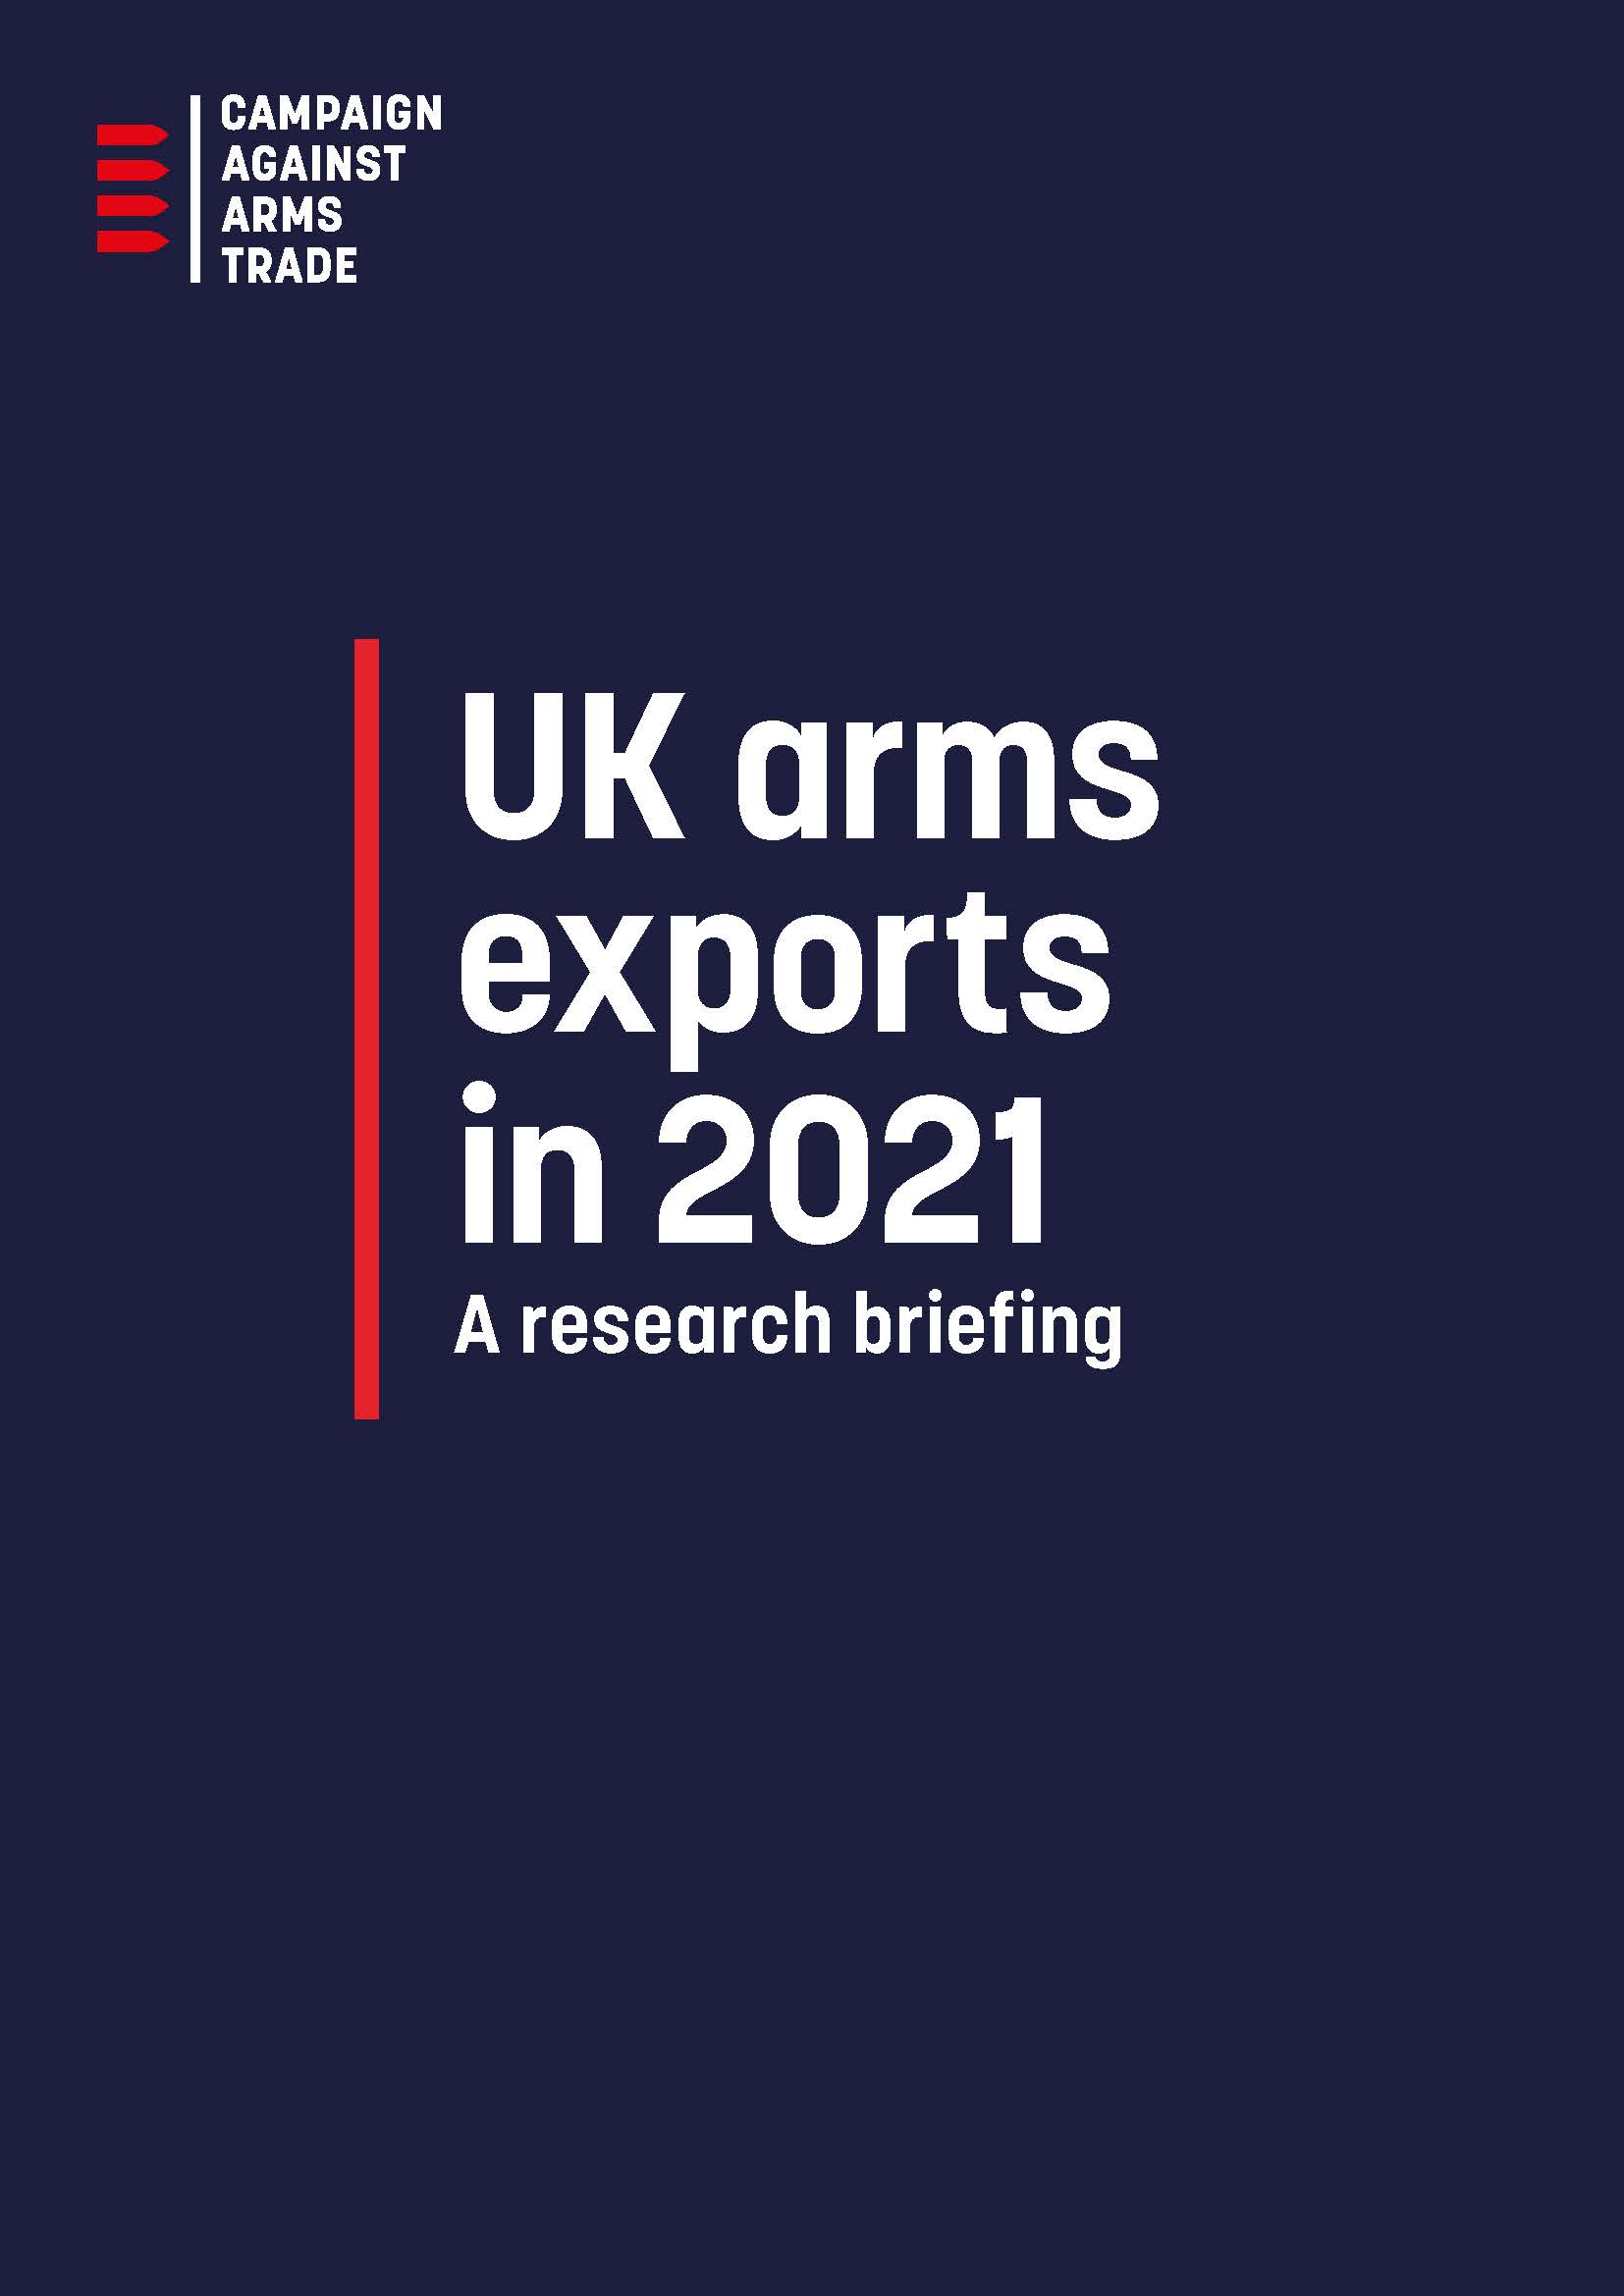 Report cover. Title "UK arms exports in 2021 - a research briefing". CAAT Logo in top left corner.